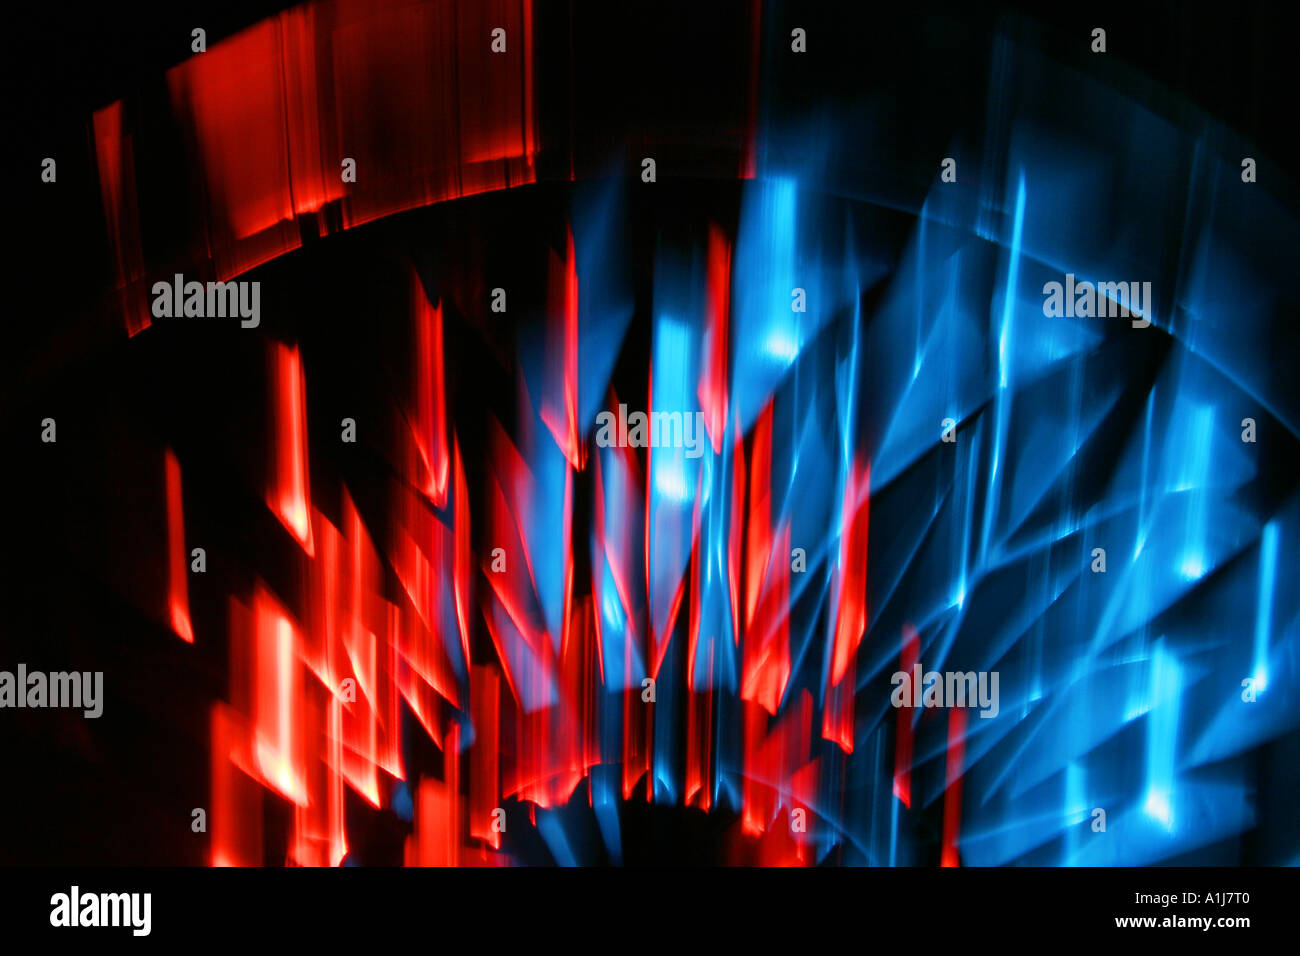 Abstract design created in a cut crystal glass plate with red and blue light Stock Photo